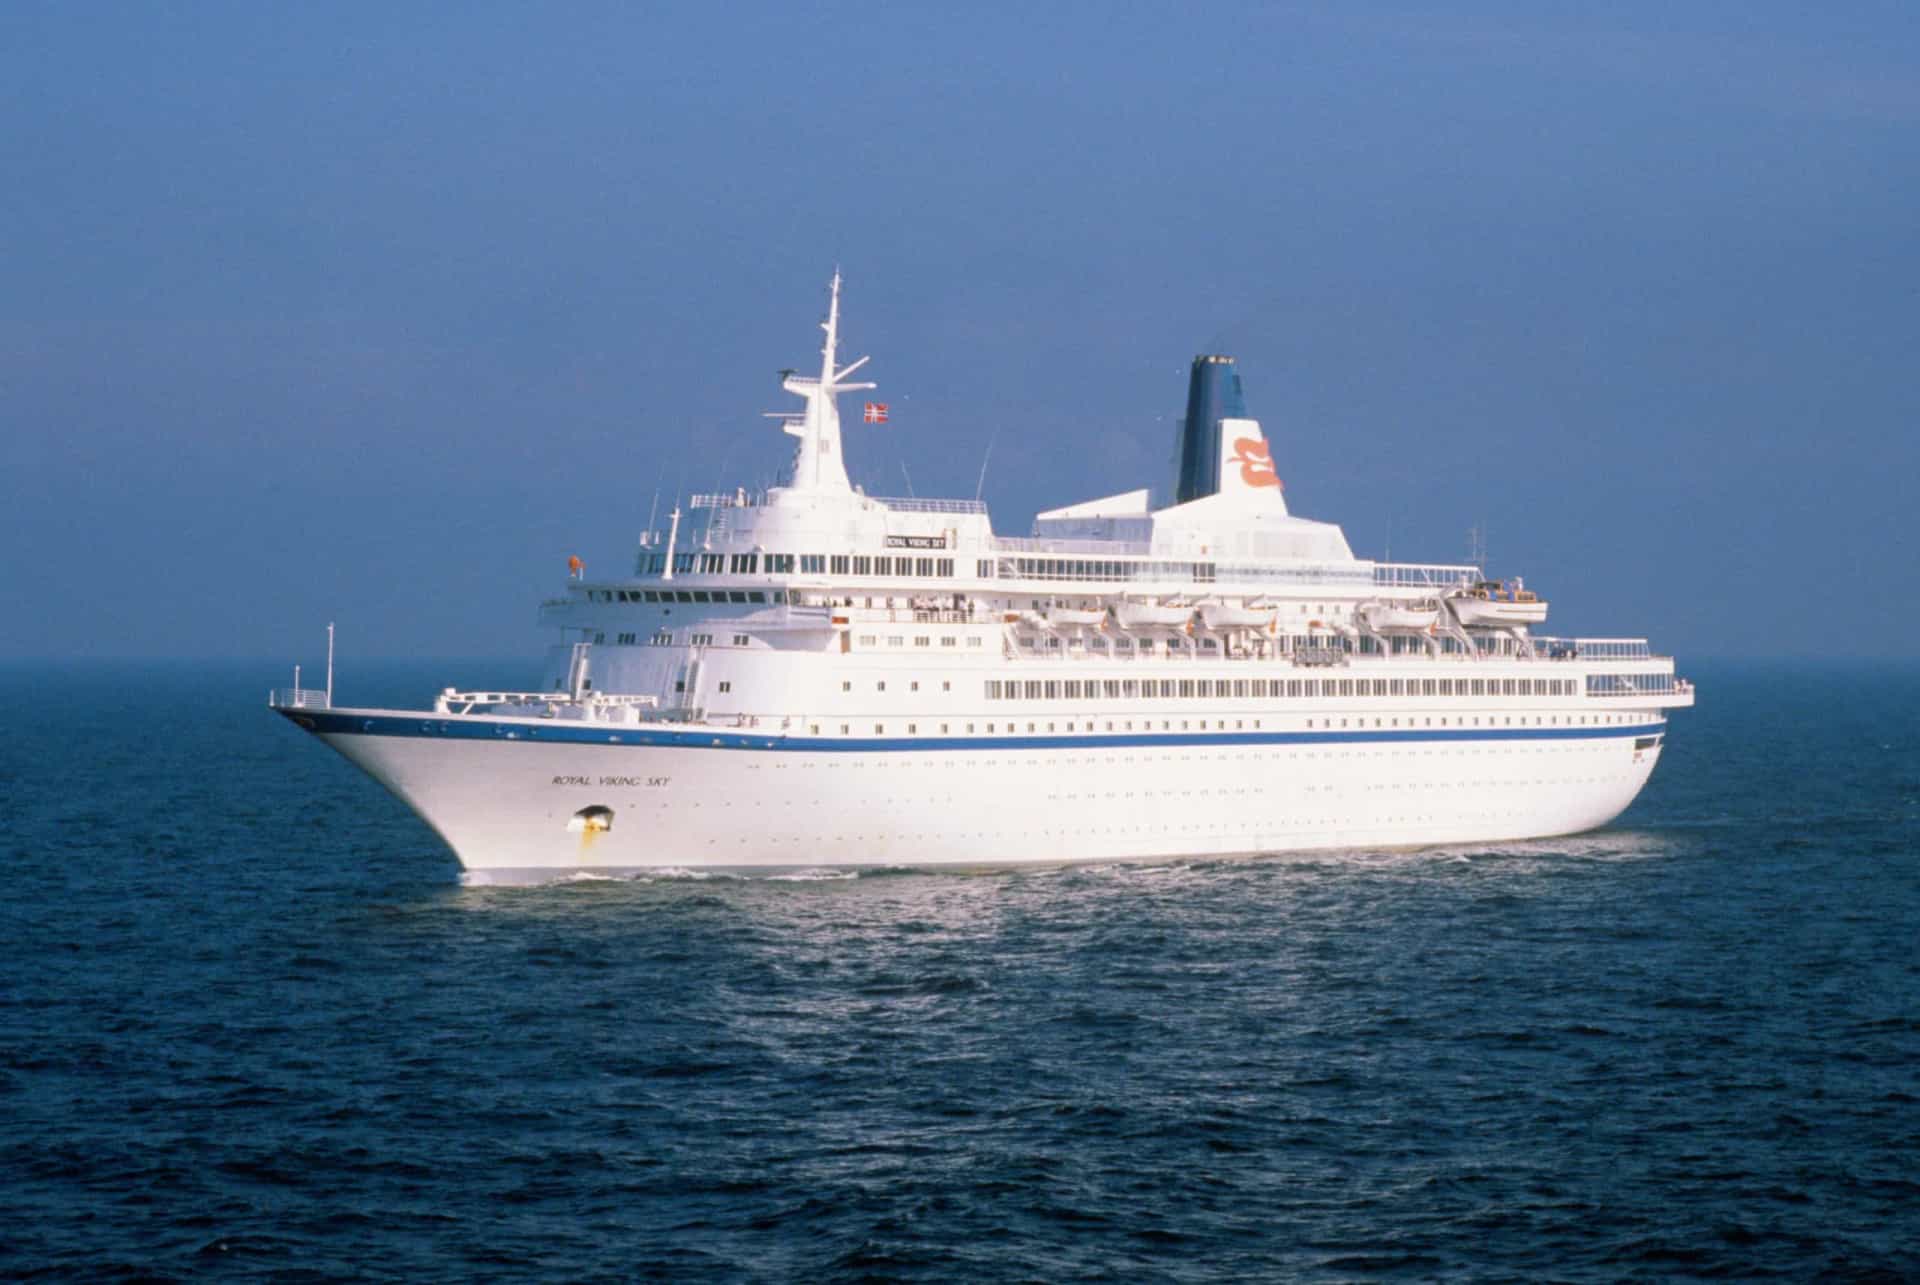 <p>By the 1970s and 1980s, cruise ship vacations were no longer the sole preserve of the wealthy. And in the wake of this boom in holidays on the high seas came more cruise ships lines: Carnival in 1972; Celebrity Cruises in 1989; and Silversea in 1994. </p><p><a href="https://www.msn.com/en-za/community/channel/vid-7xx8mnucu55yw63we9va2gwr7uihbxwc68fxqp25x6tg4ftibpra?cvid=94631541bc0f4f89bfd59158d696ad7e">Follow us and access great exclusive content every day</a></p>